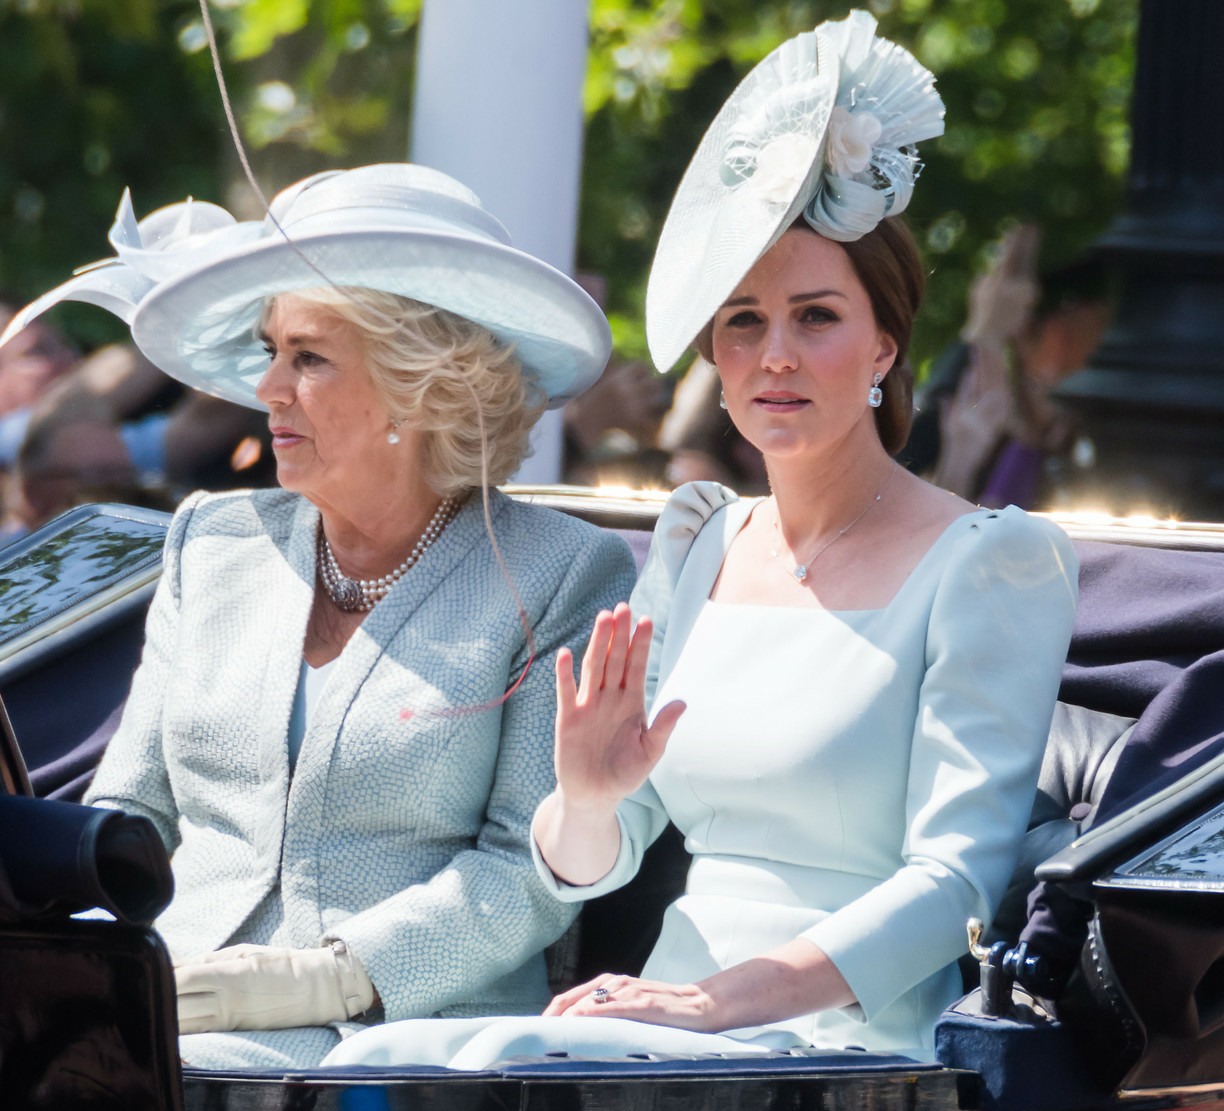 Camilla, Duchess of Cornwall, Catherine, Duchess of Cambridge attend Trooping the Colour for the official birthday of Queen Elizabeth II